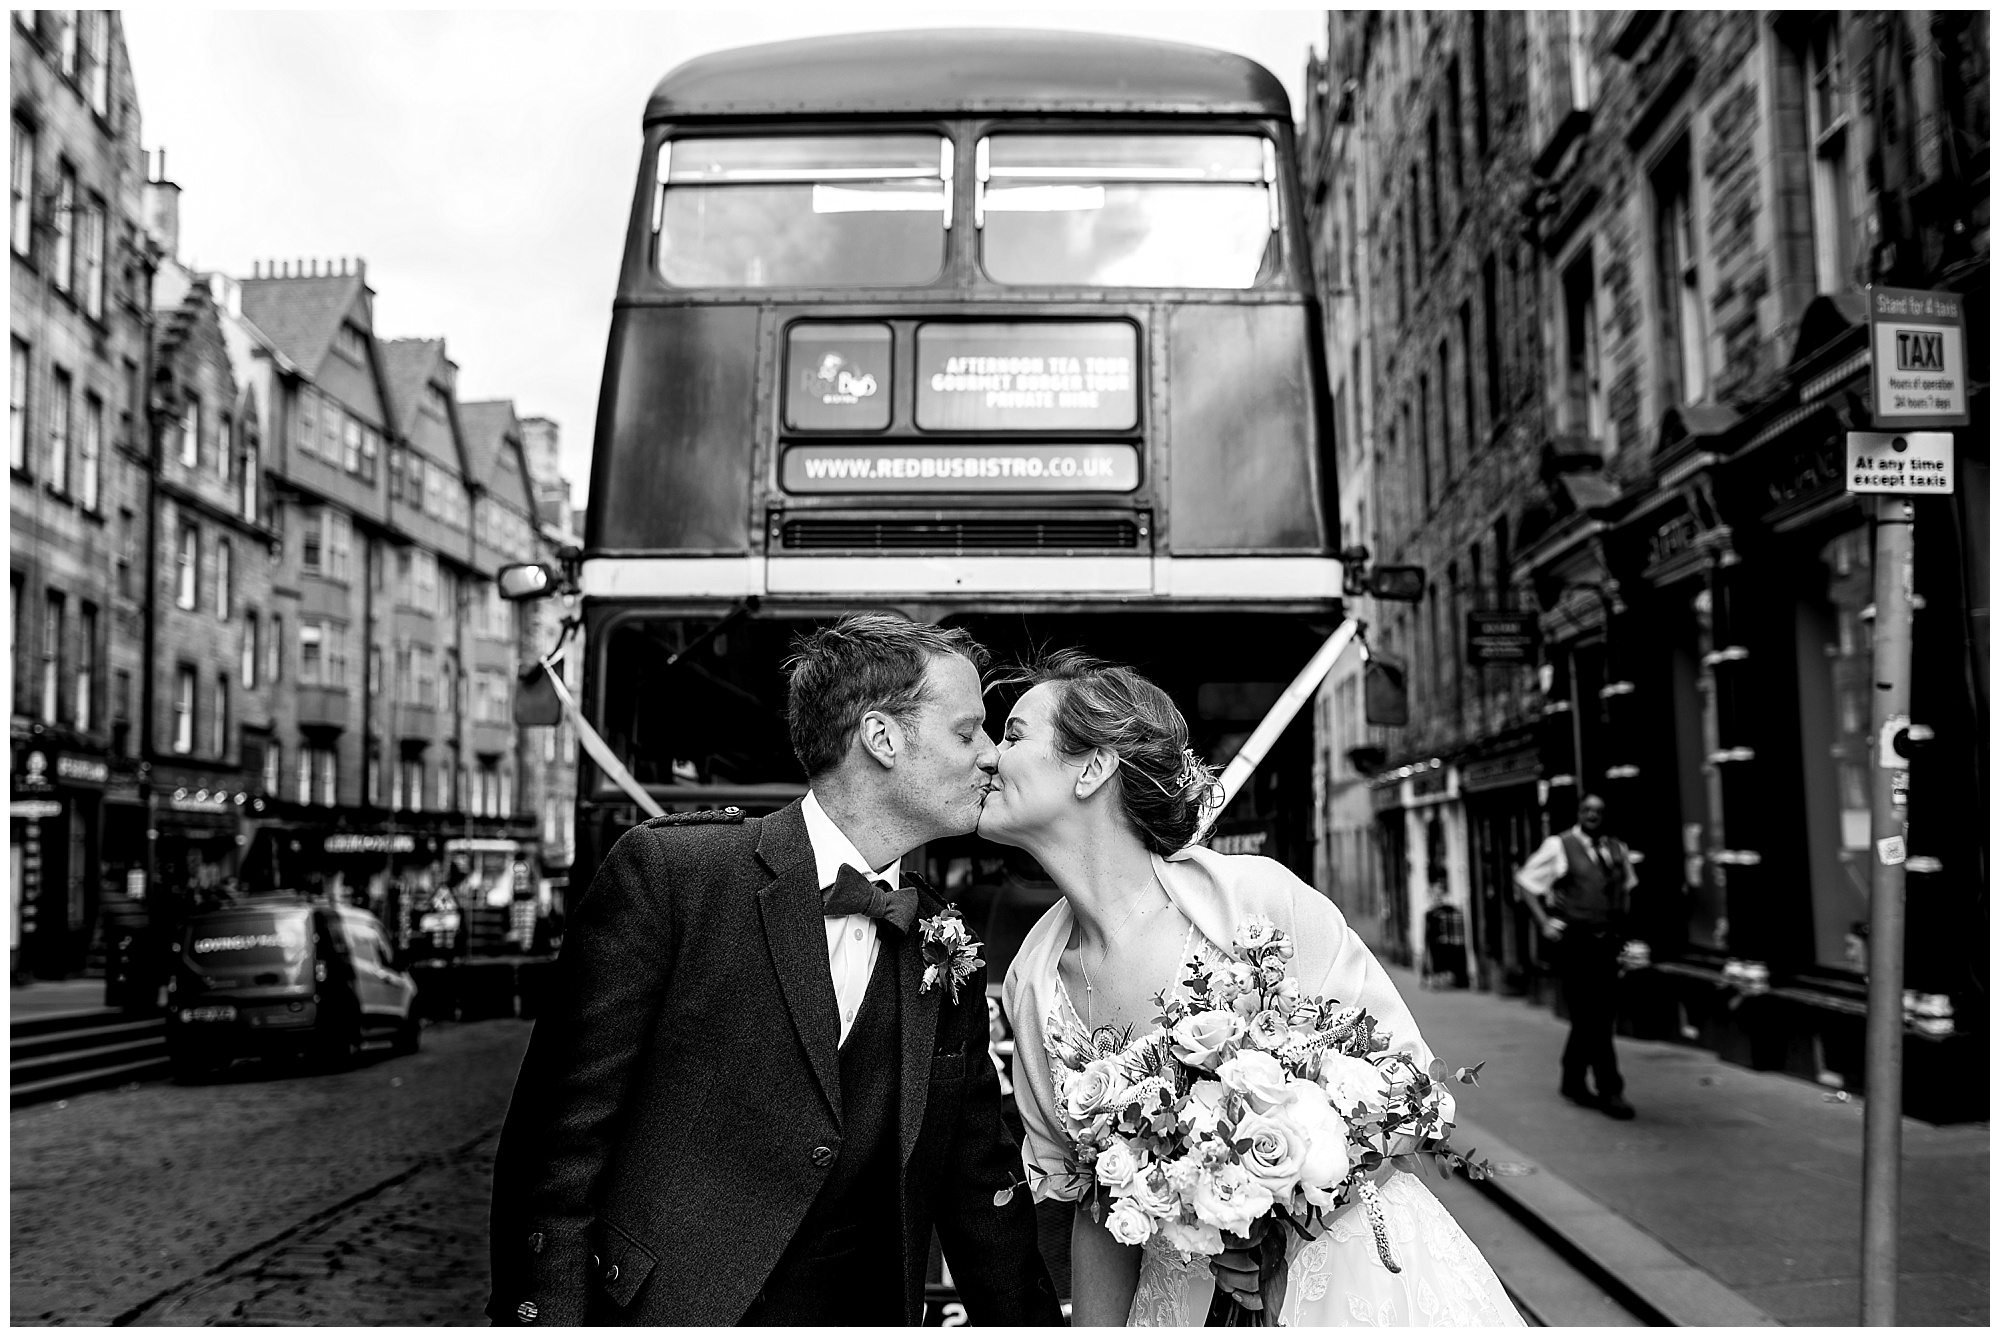 Have you planned any fun things for your guests? I love the Edinburgh Red Bus tours, it's good fun for photos to and if you're having a destination wedding in Edinburgh it's a great way to bring in some sightseeing. 

Check out my bio link for my gui